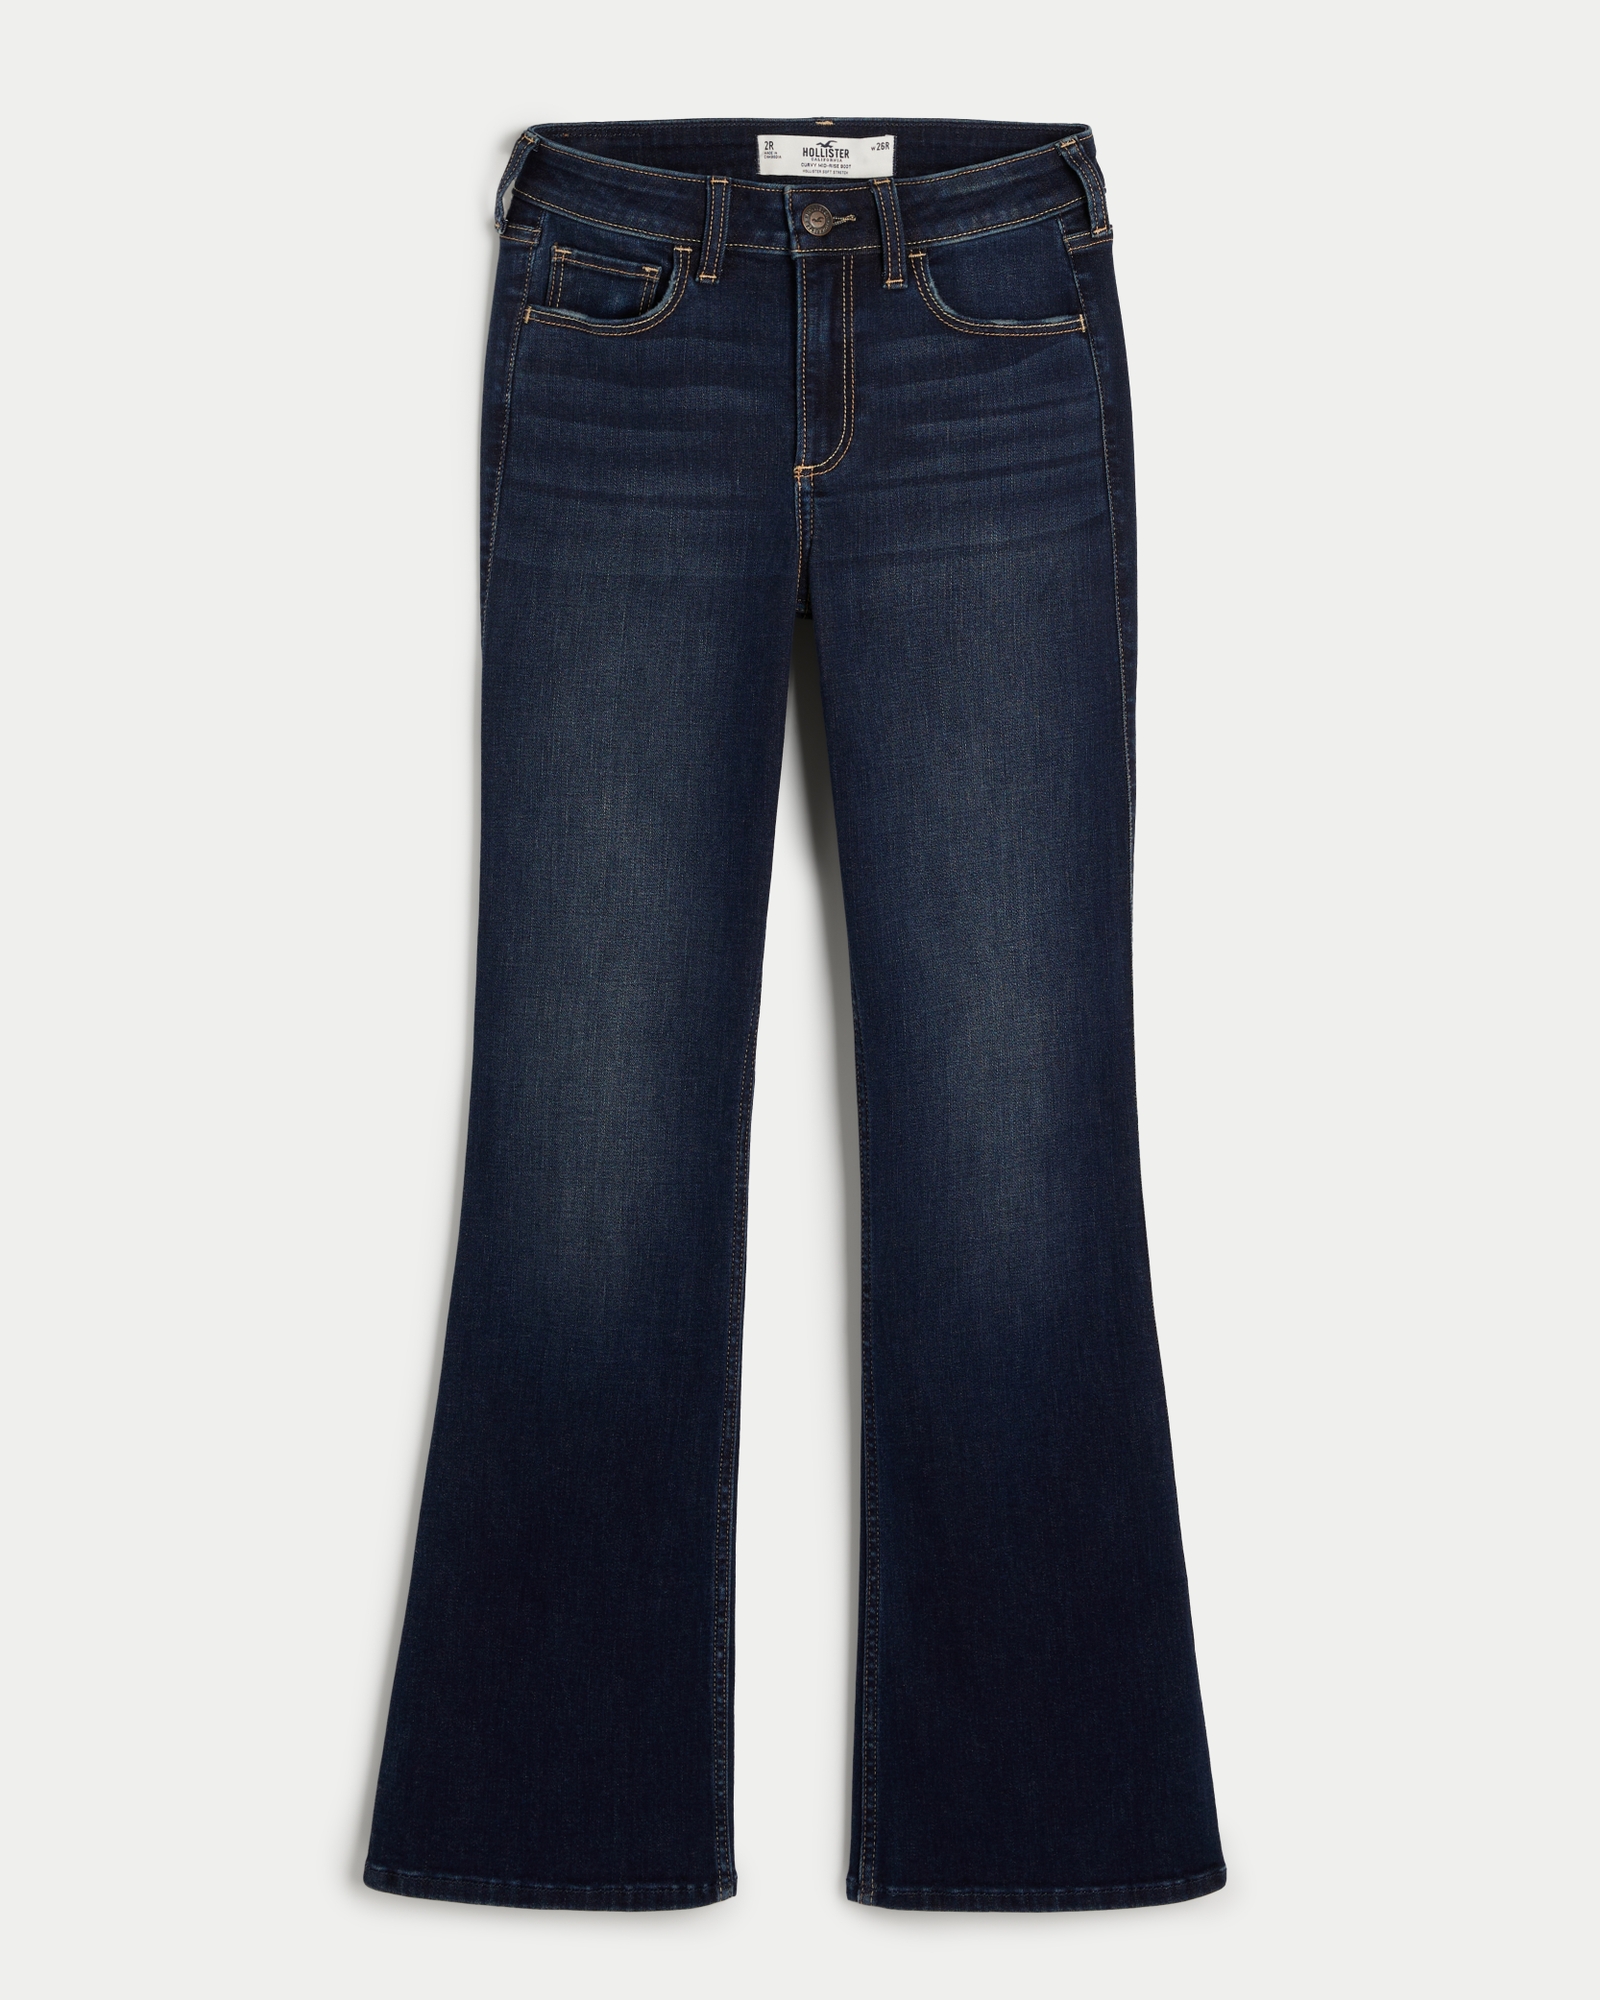 Women's Curvy Mid-Rise Ripped Medium Wash Boot Jeans - Hollister